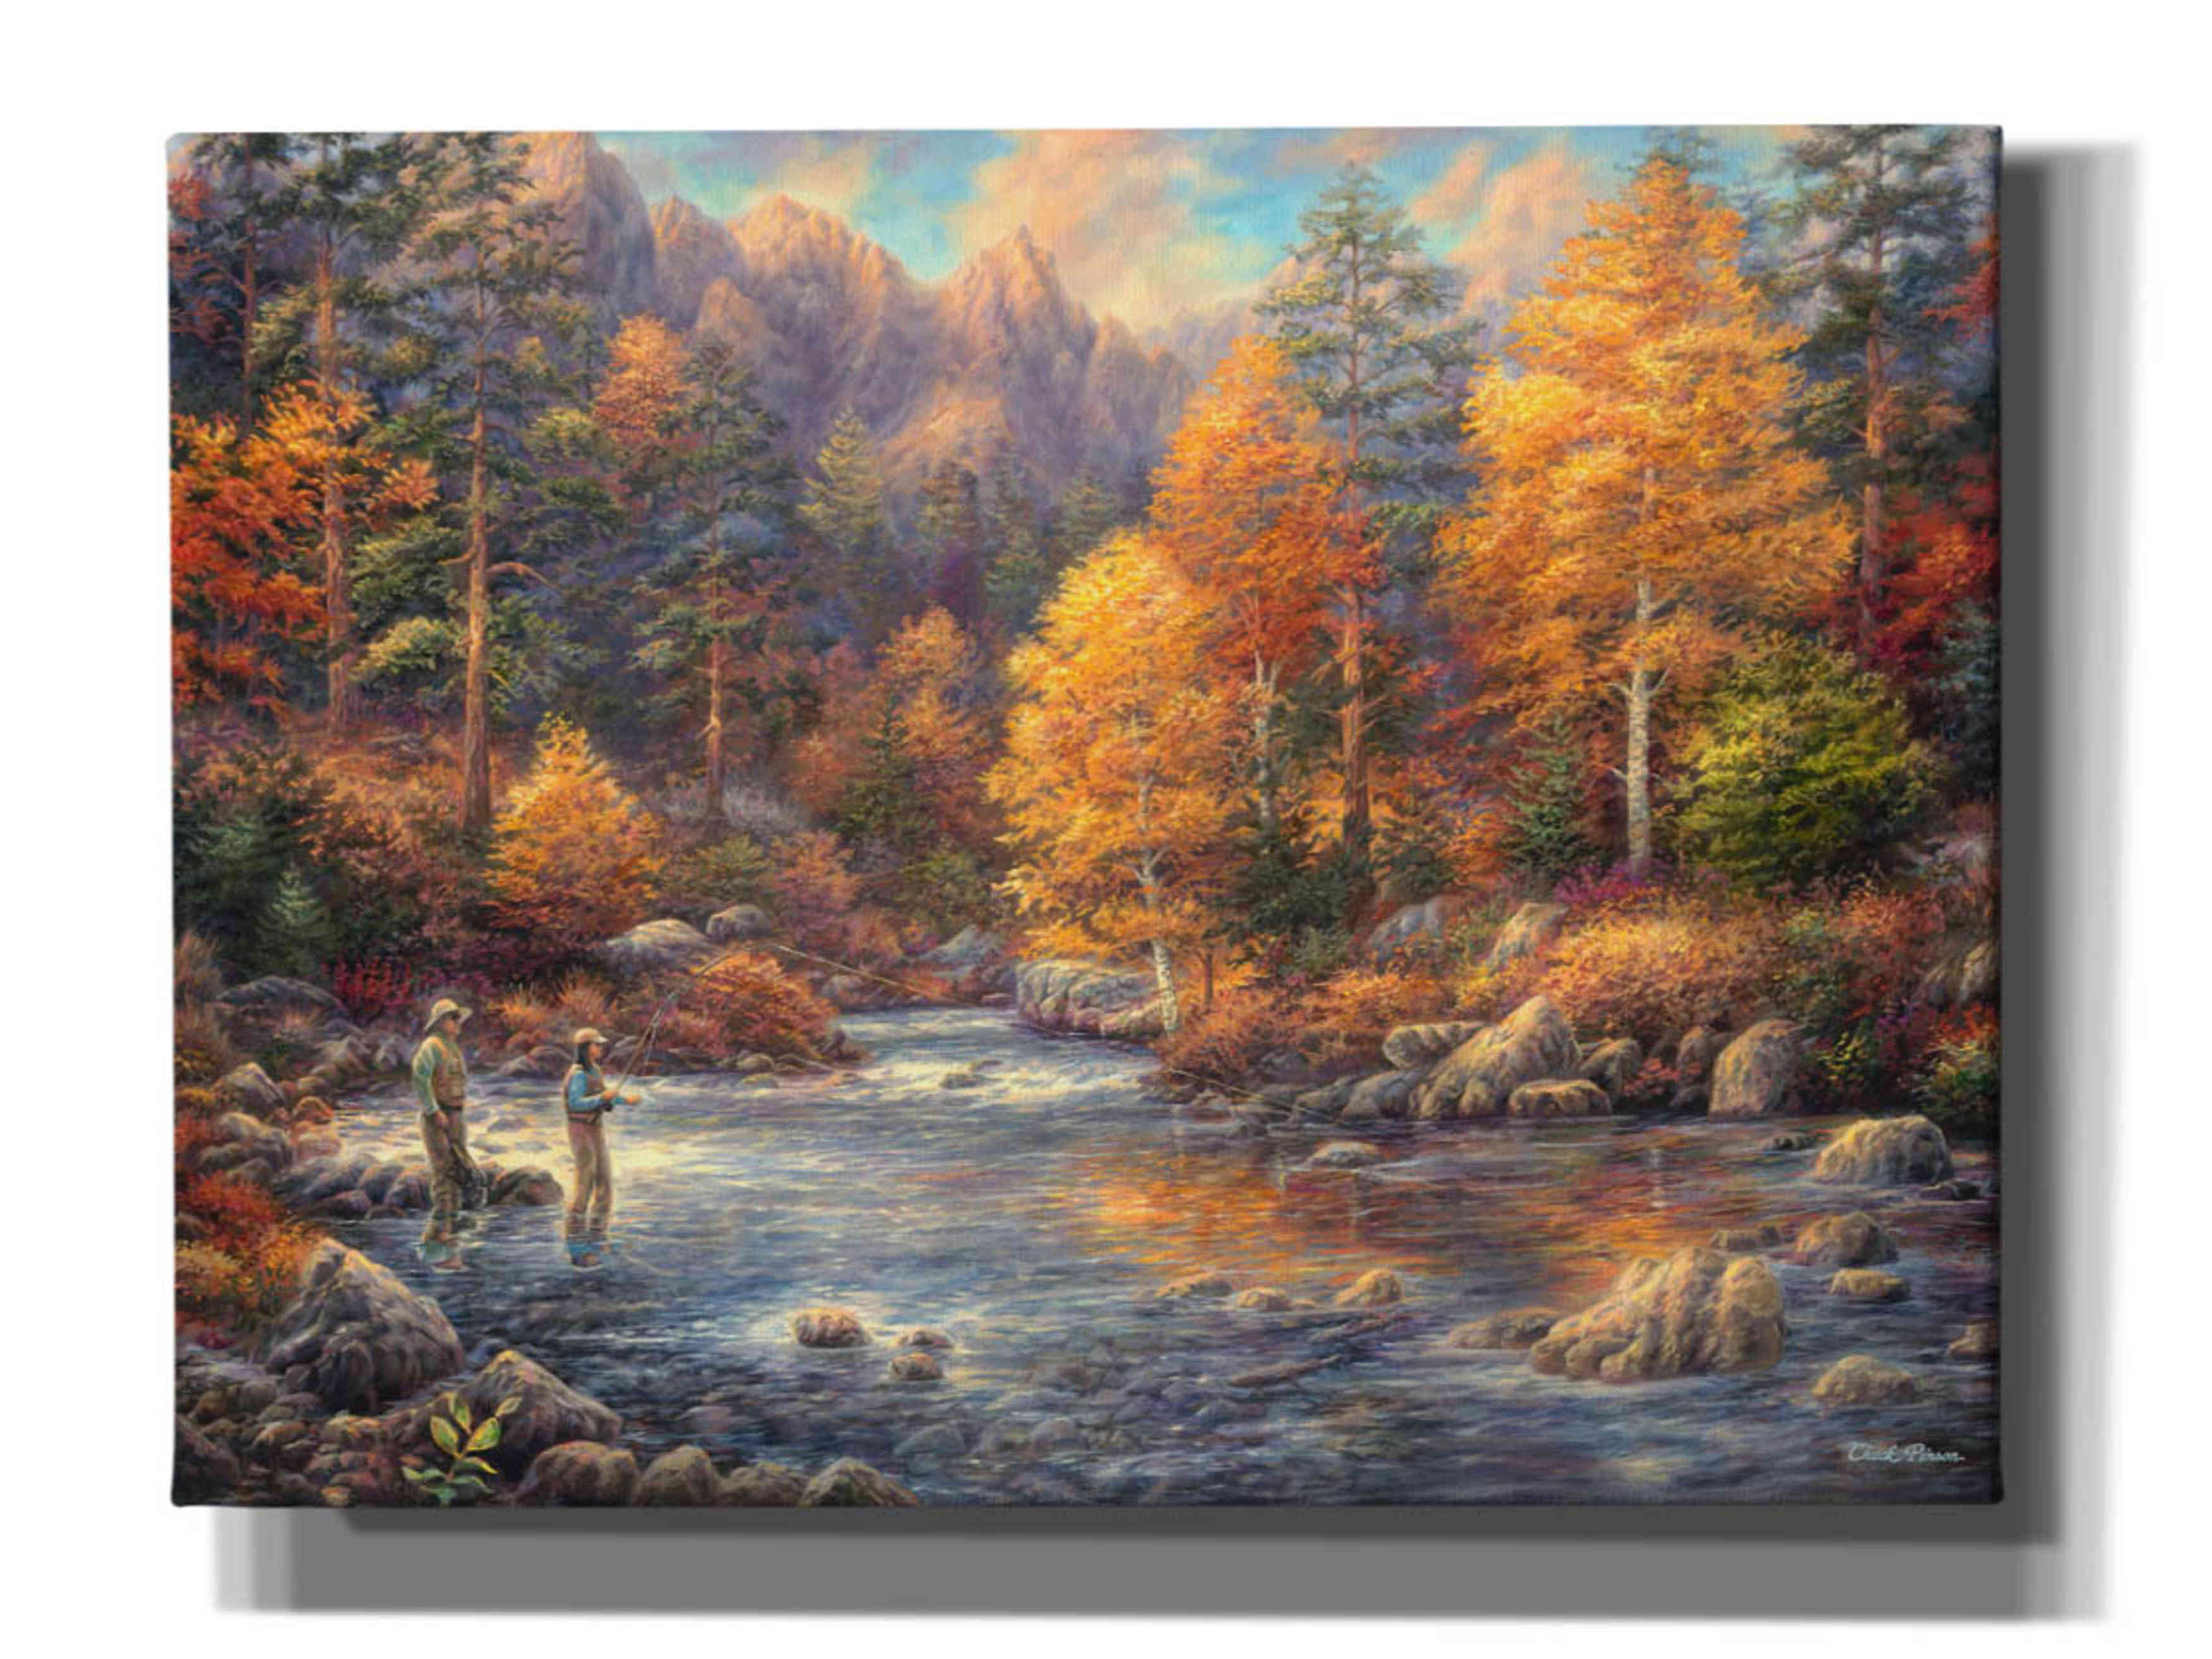 Millwood Pines Epic Graffiti 'Fly Fishing Legacy' By Chuck Pinson Fly  Fishing Legacy On Canvas by Chuck Pinson Print